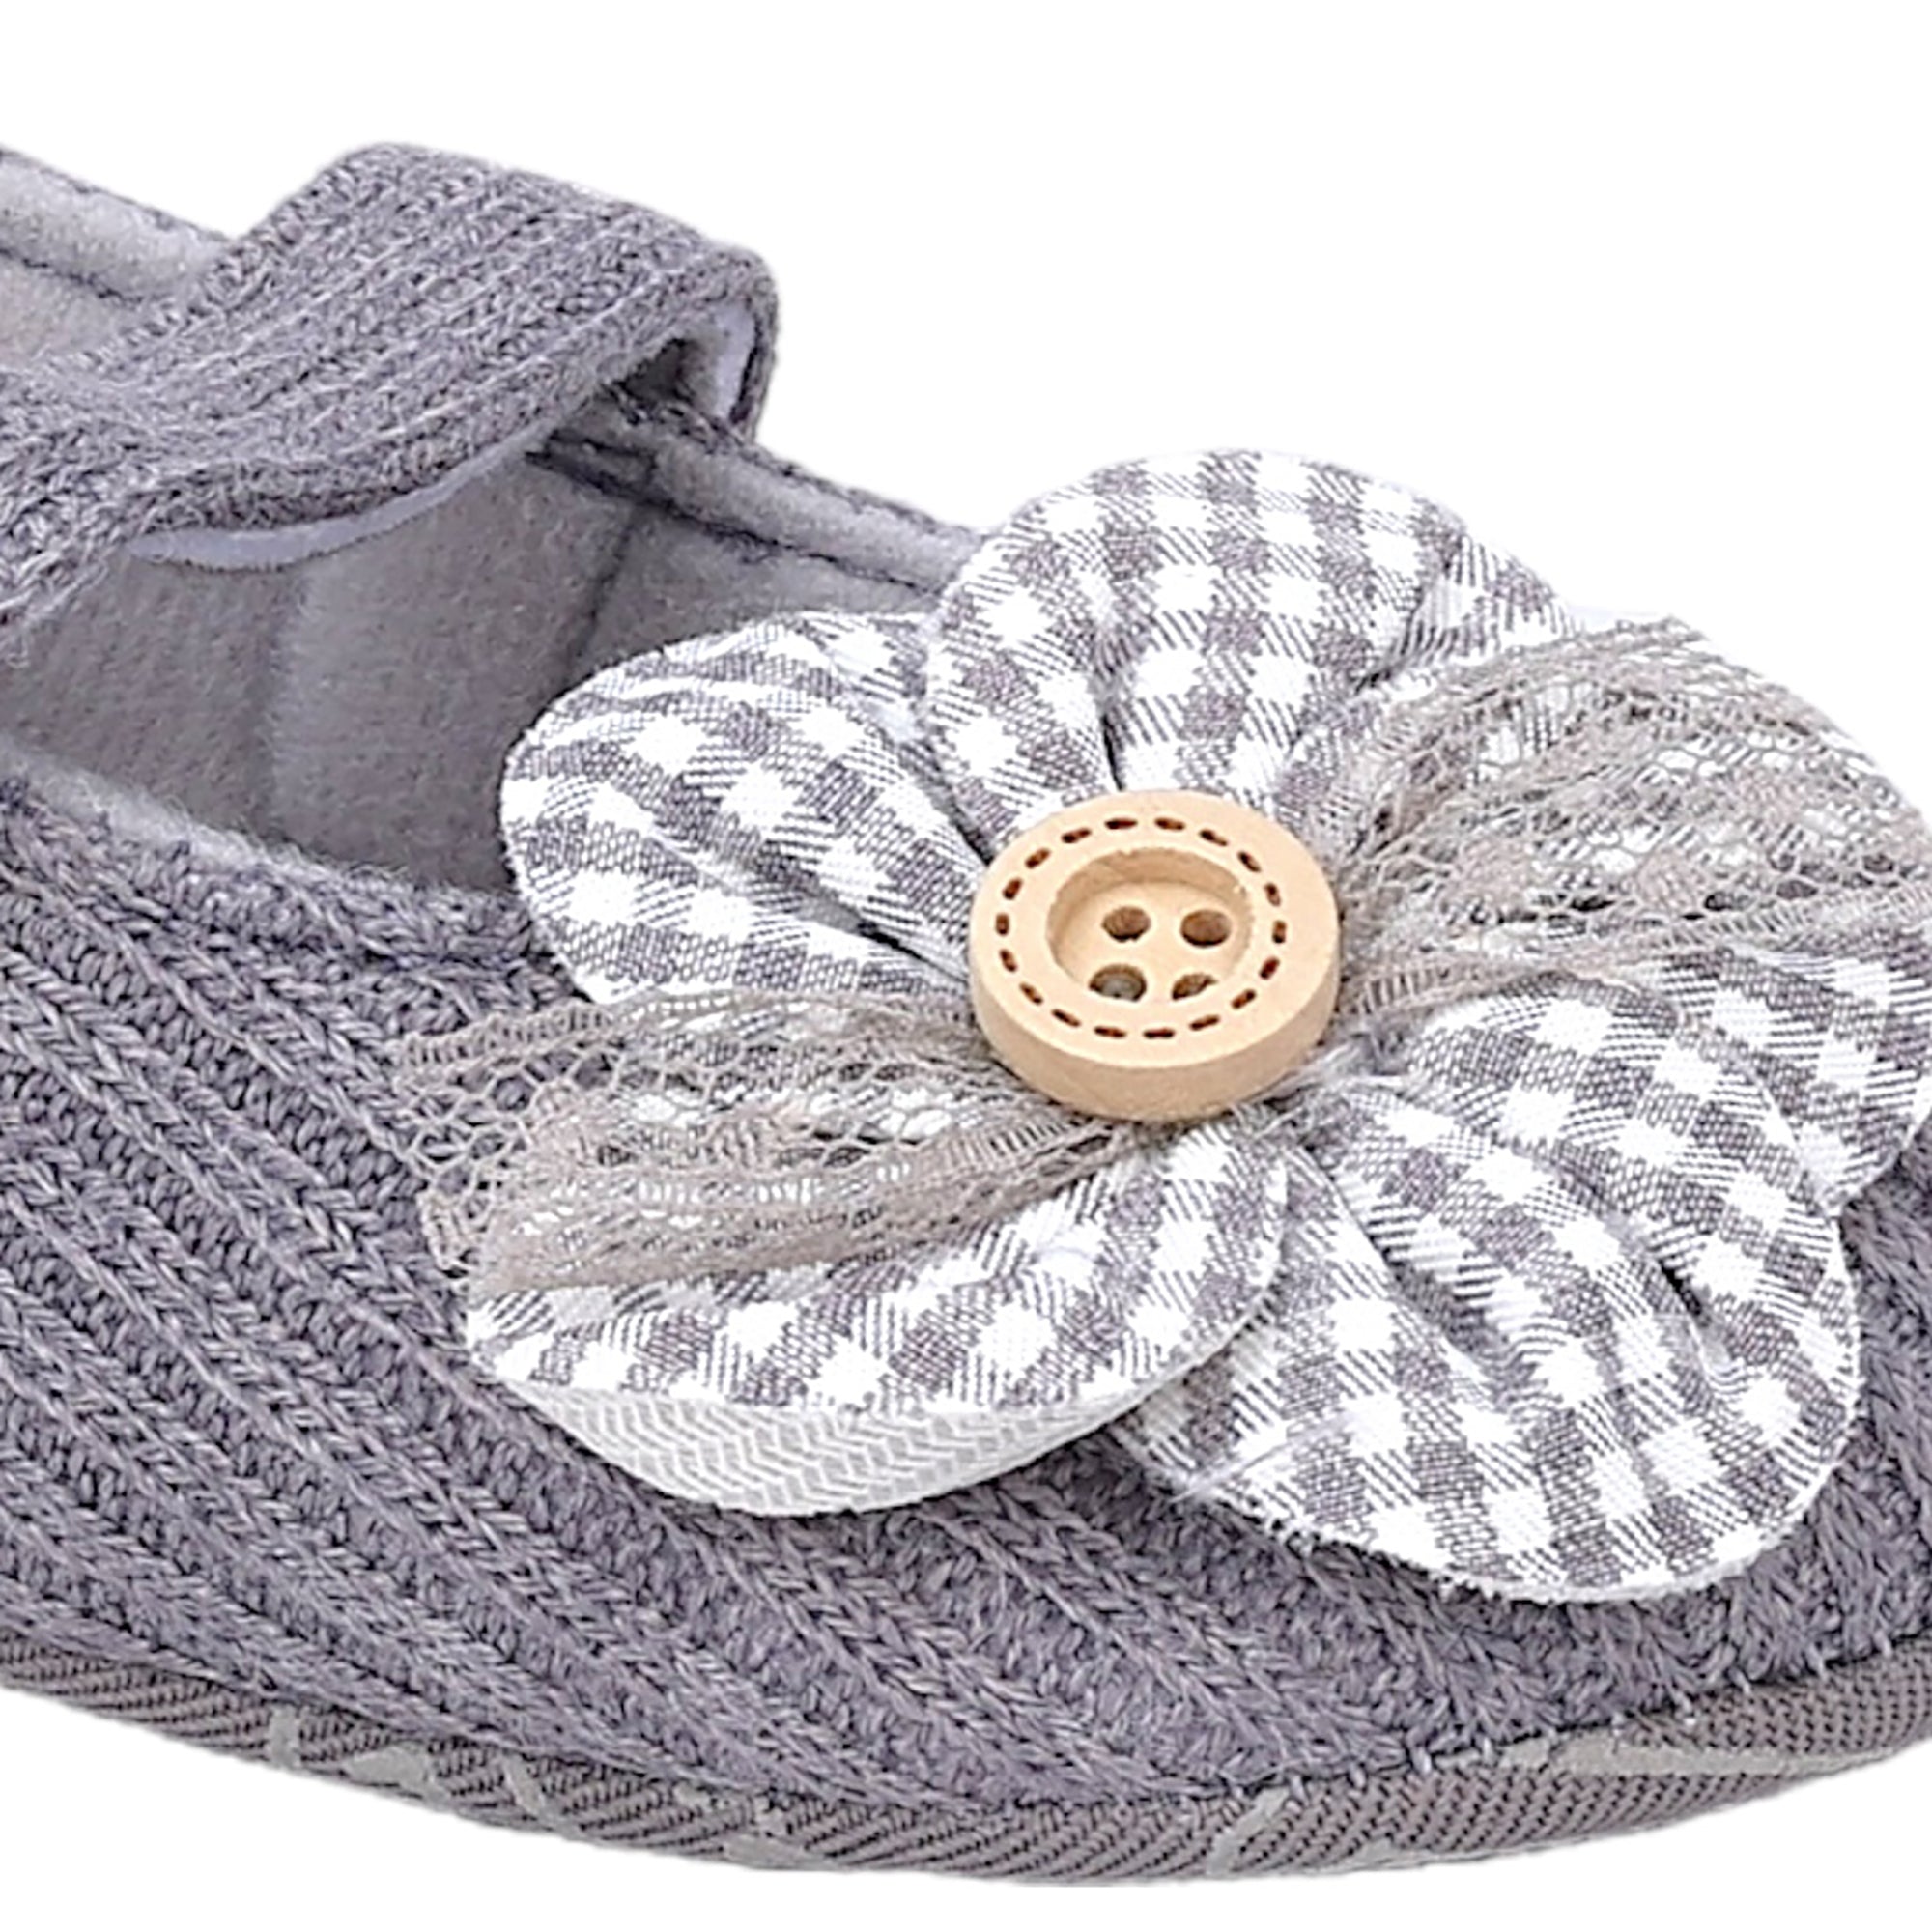 Baby Moo Flower Button Velcro Strap Ribbed Anti-Skid Ballerina Booties - Grey